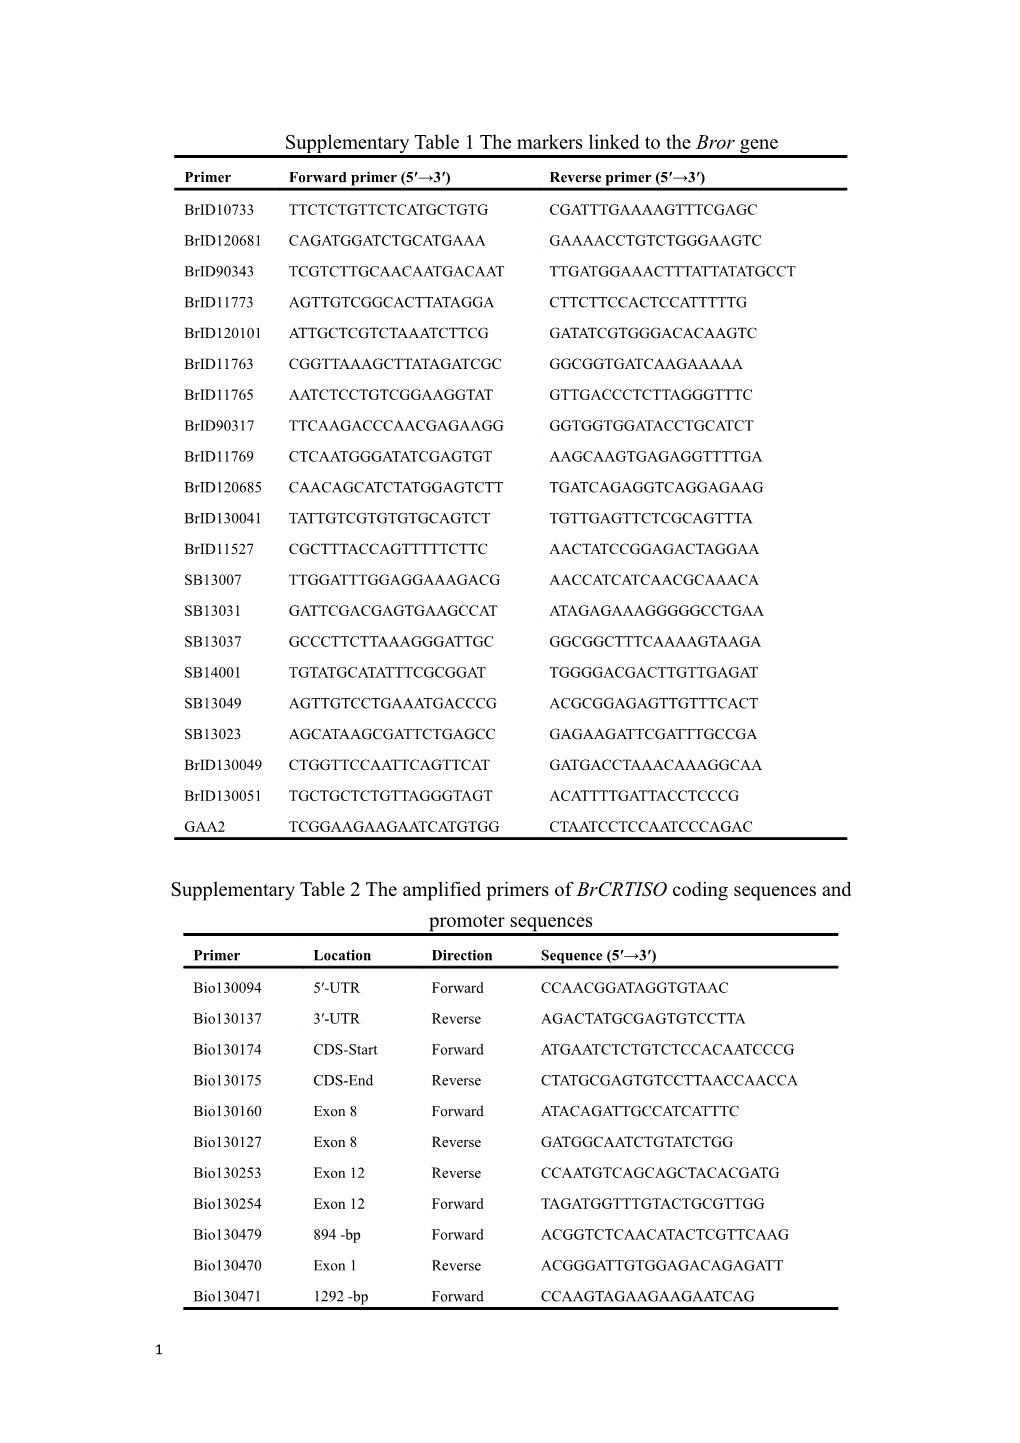 Supplementary Table 2 the Amplified Primers of Brcrtisocoding Sequencesand Promoter Sequences